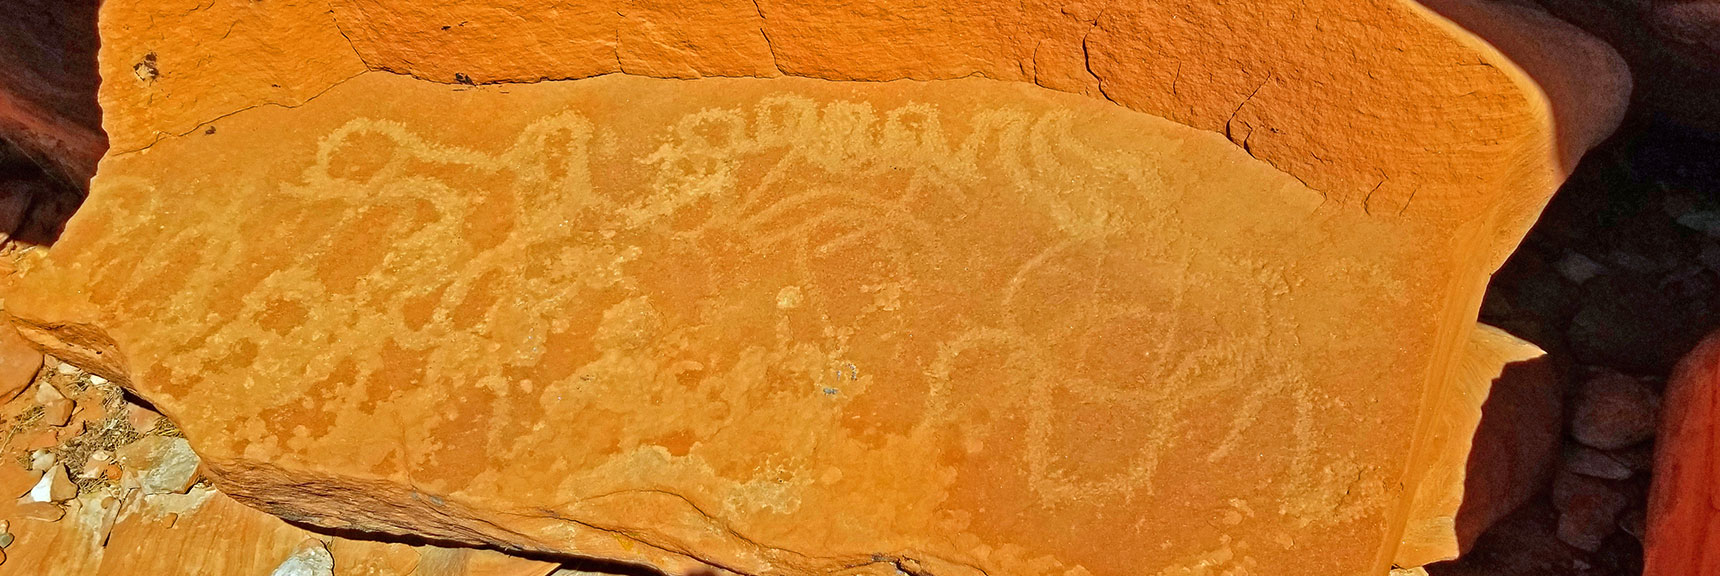 Ancient Petroglyph Drawings at the Cooking Area | Little Red Rock Las Vegas, Nevada, Near La Madre Mountains Wilderness